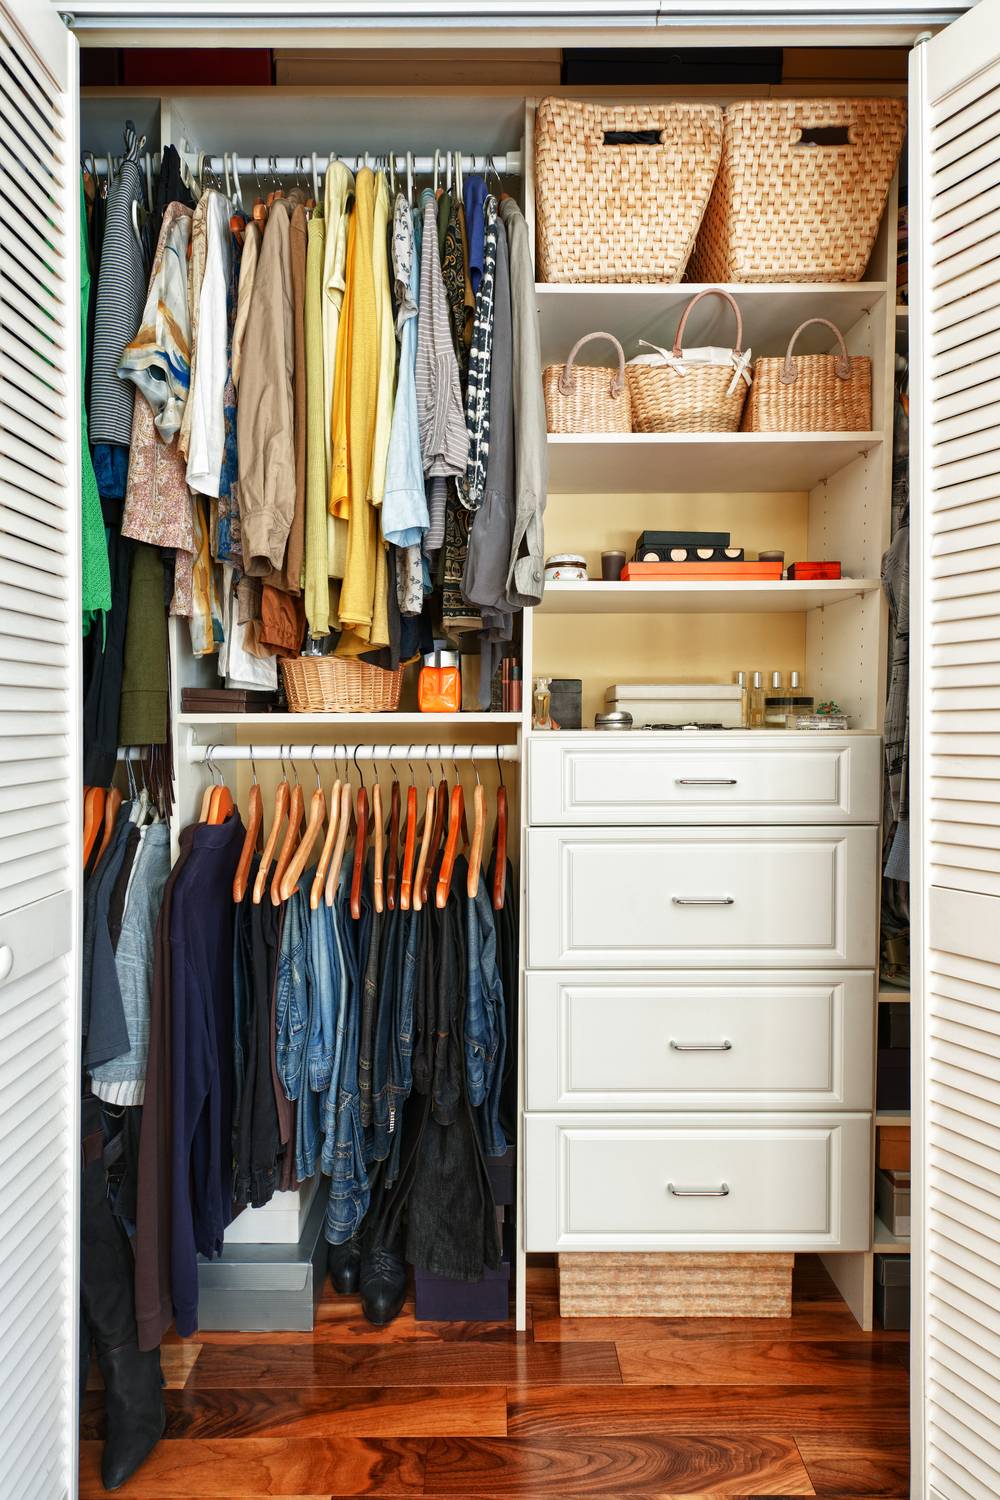 A well organized closet with hanging clothes and white drawers.